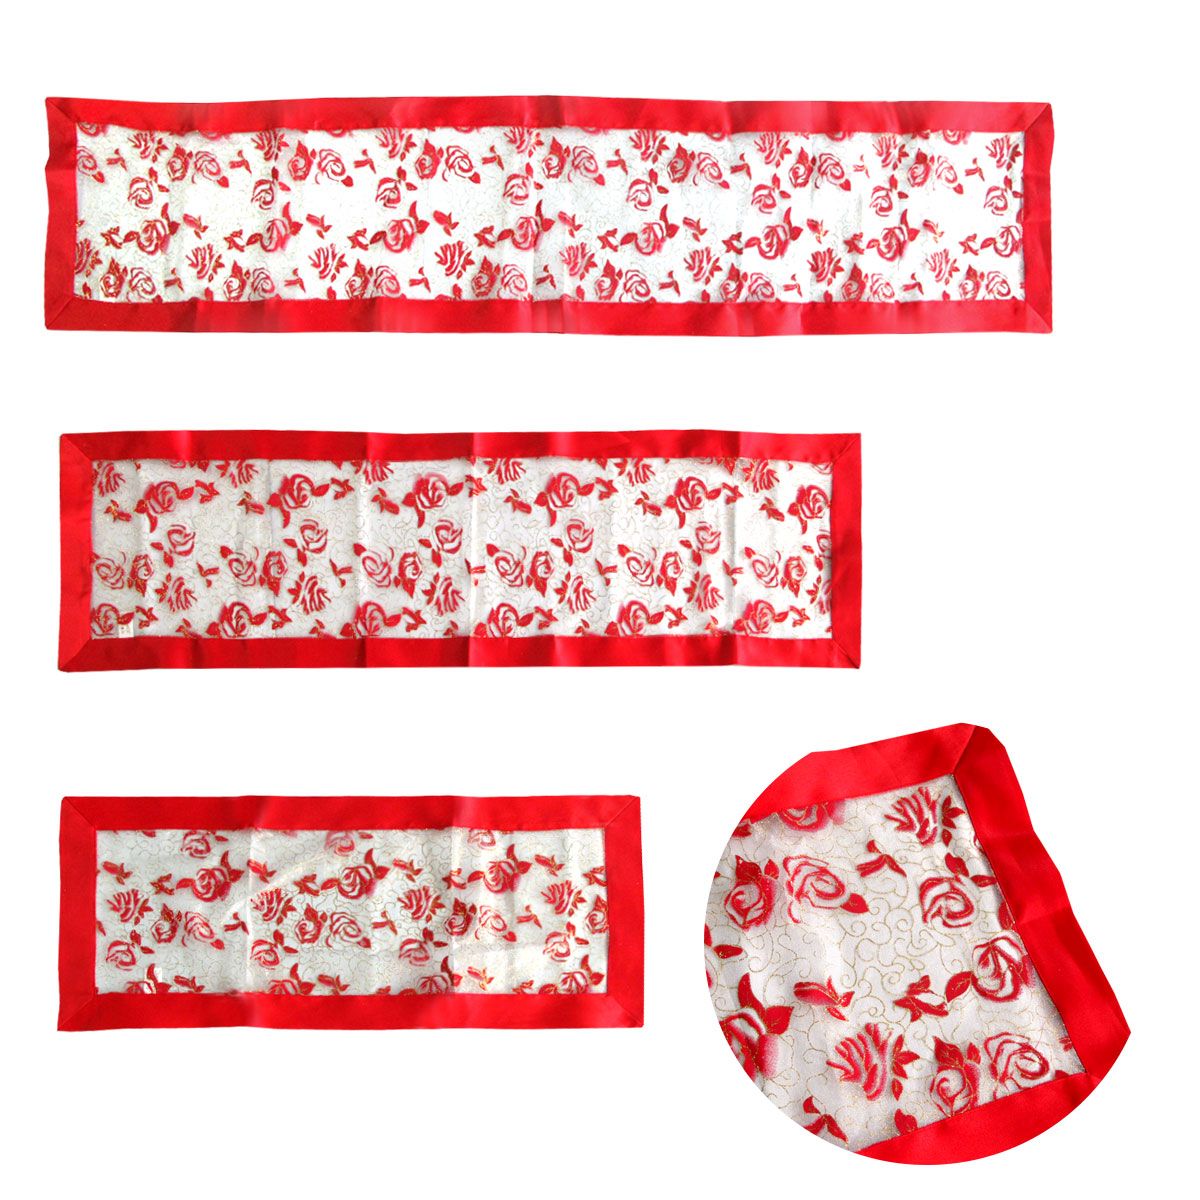 All That Glitters 100% Cotton Red Table Runner 33 x 150 cm by Ladelle 